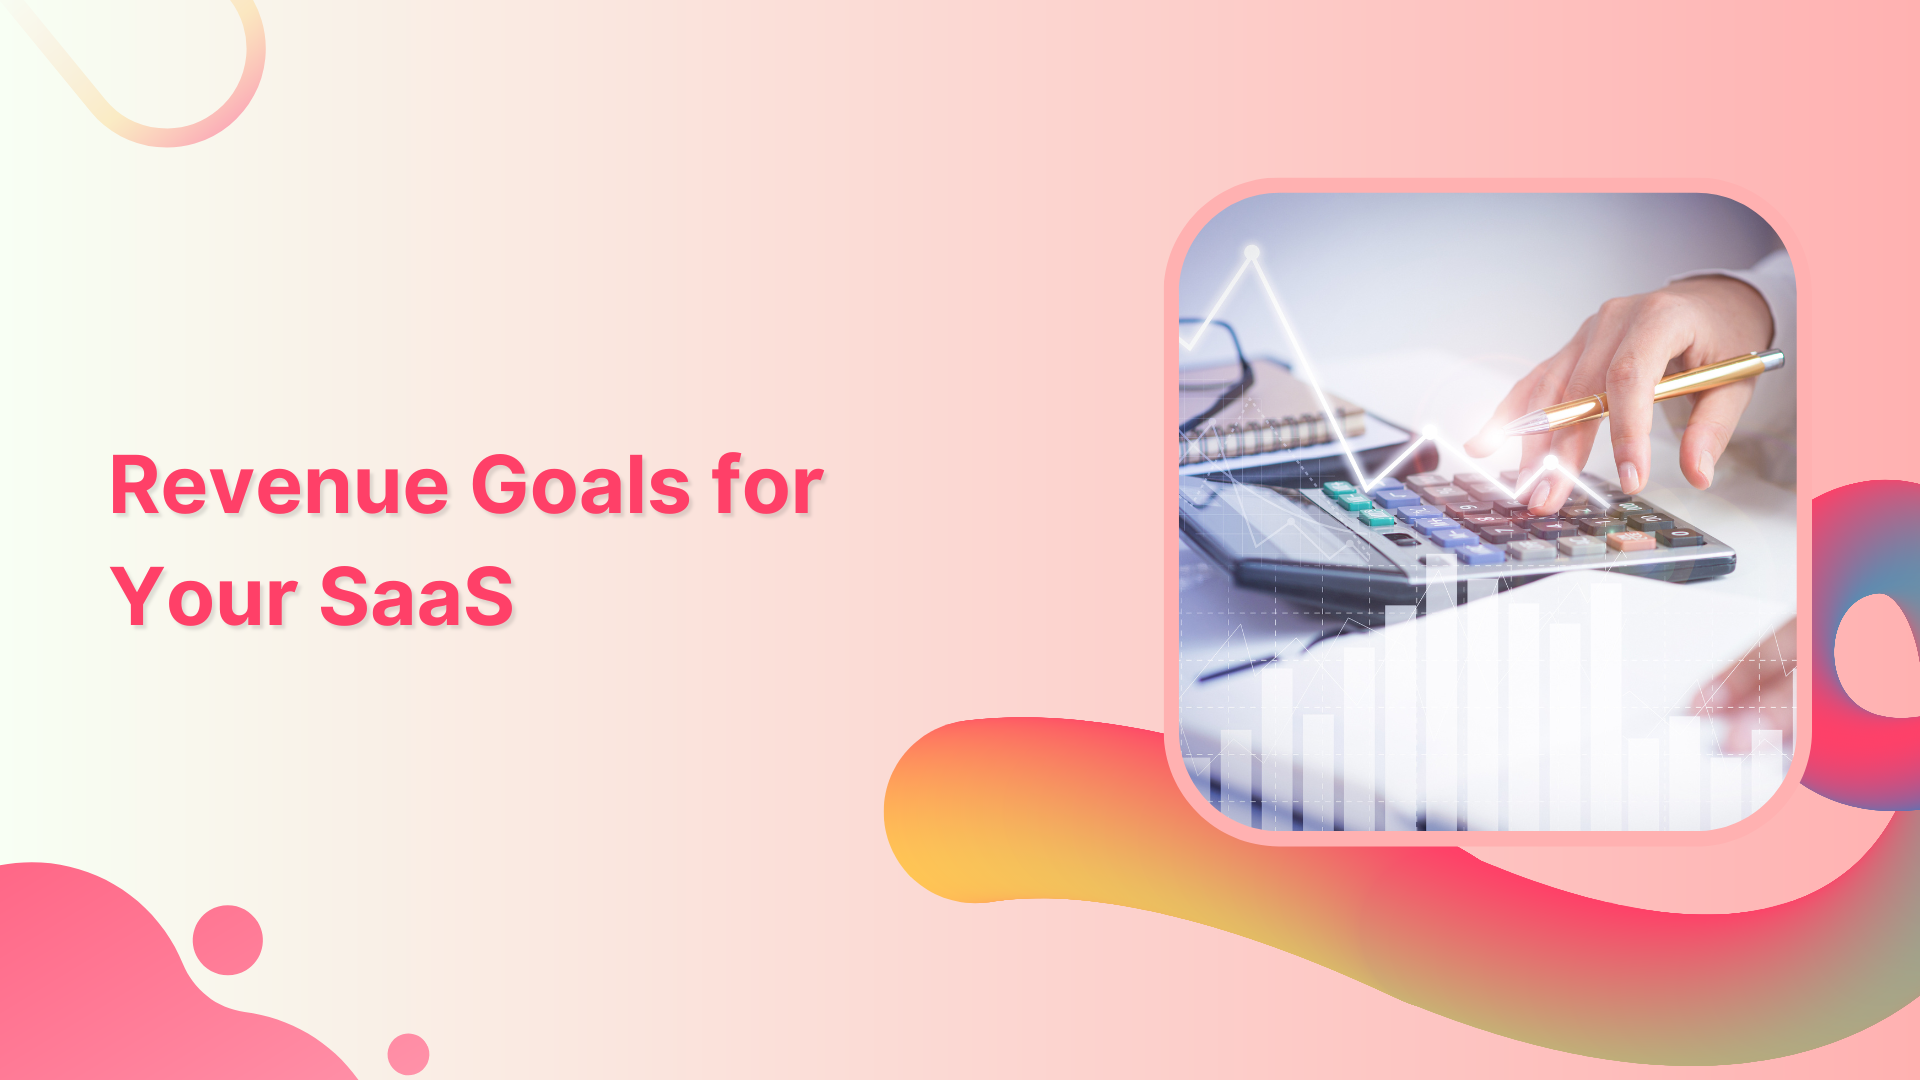 How to Set Revenue Goals for Your SaaS Business